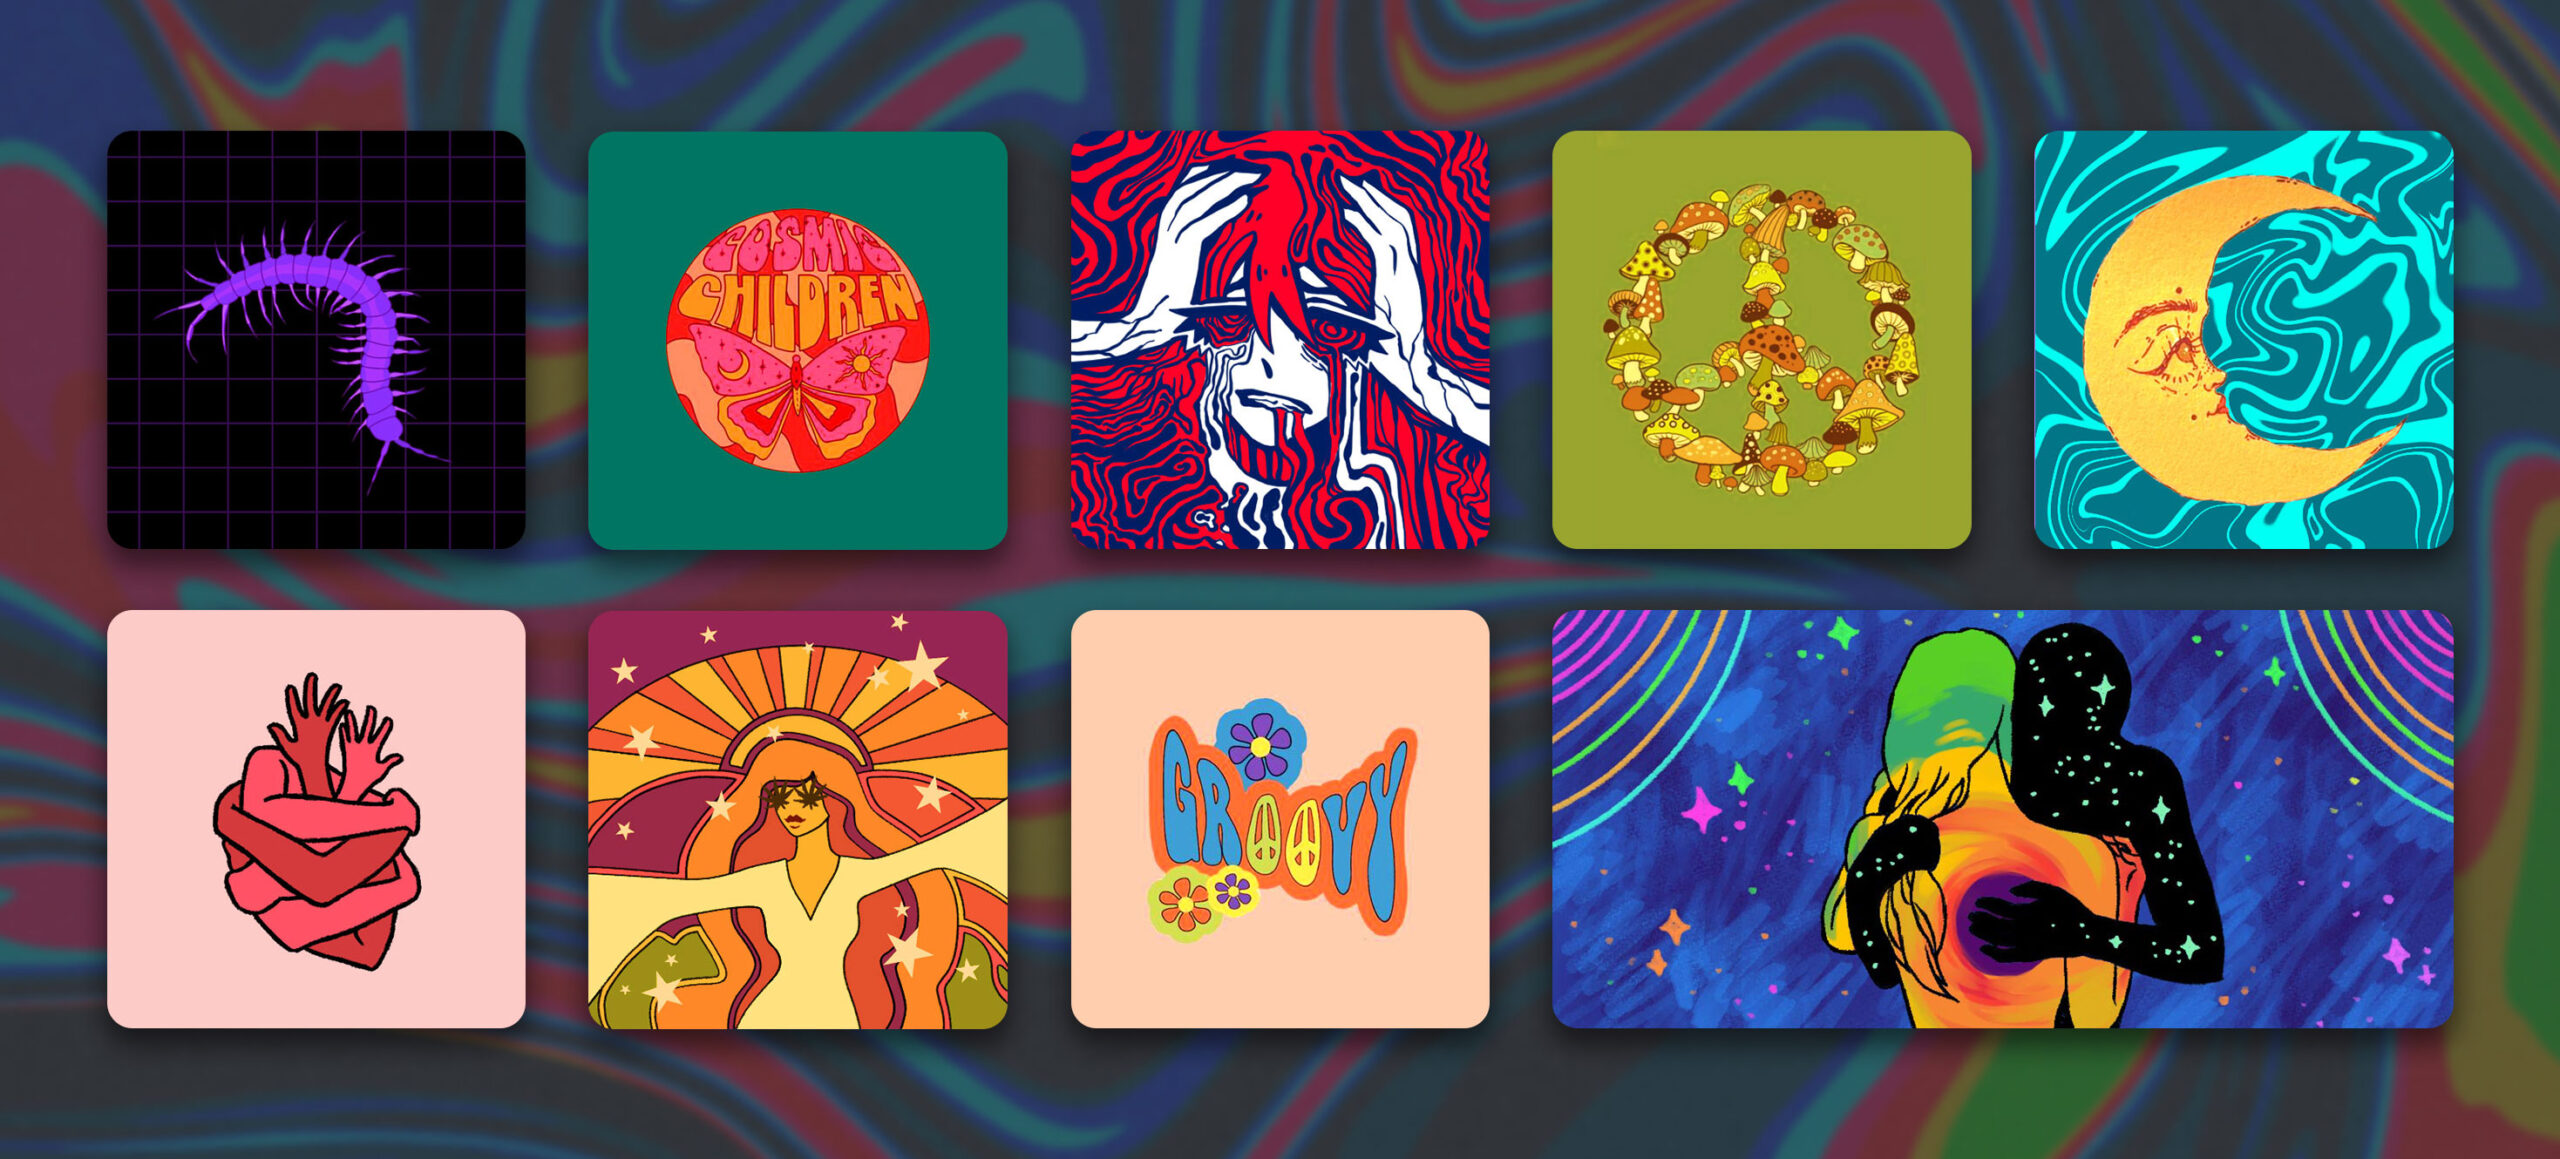 trippy widgets pack preview 5